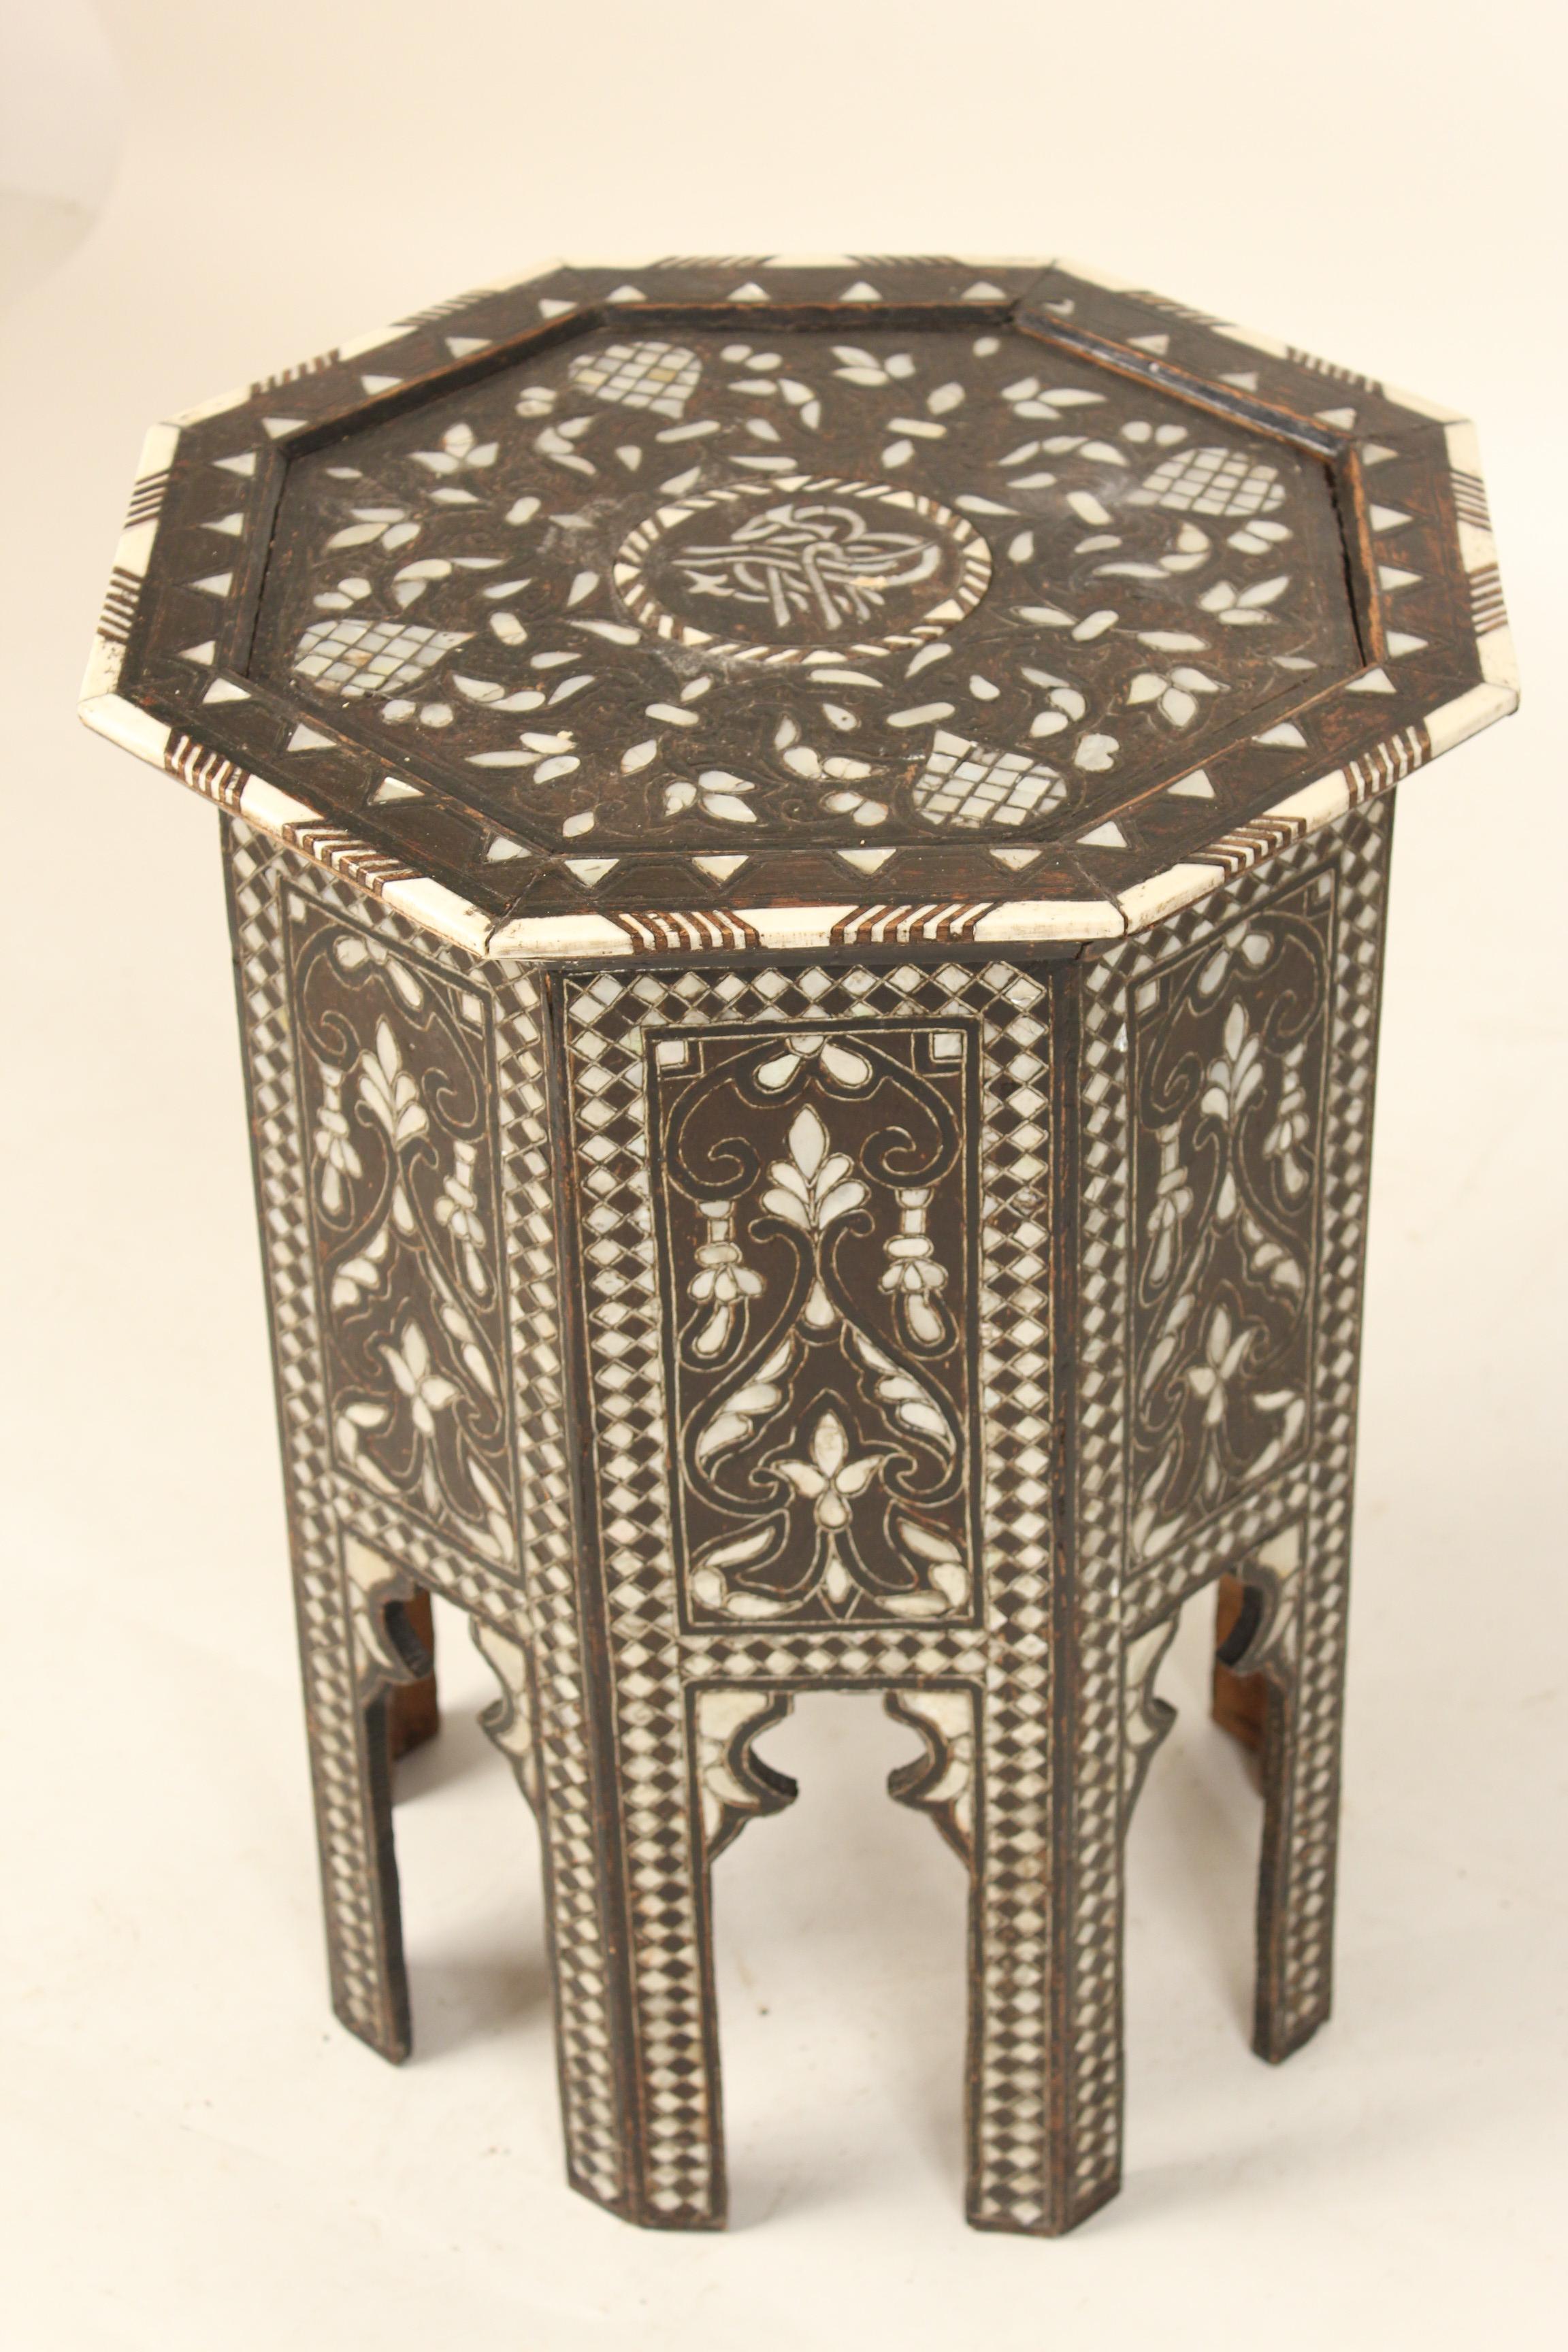 Islamic Middle Eastern Mother of Pearl Inlaid Occasional Table